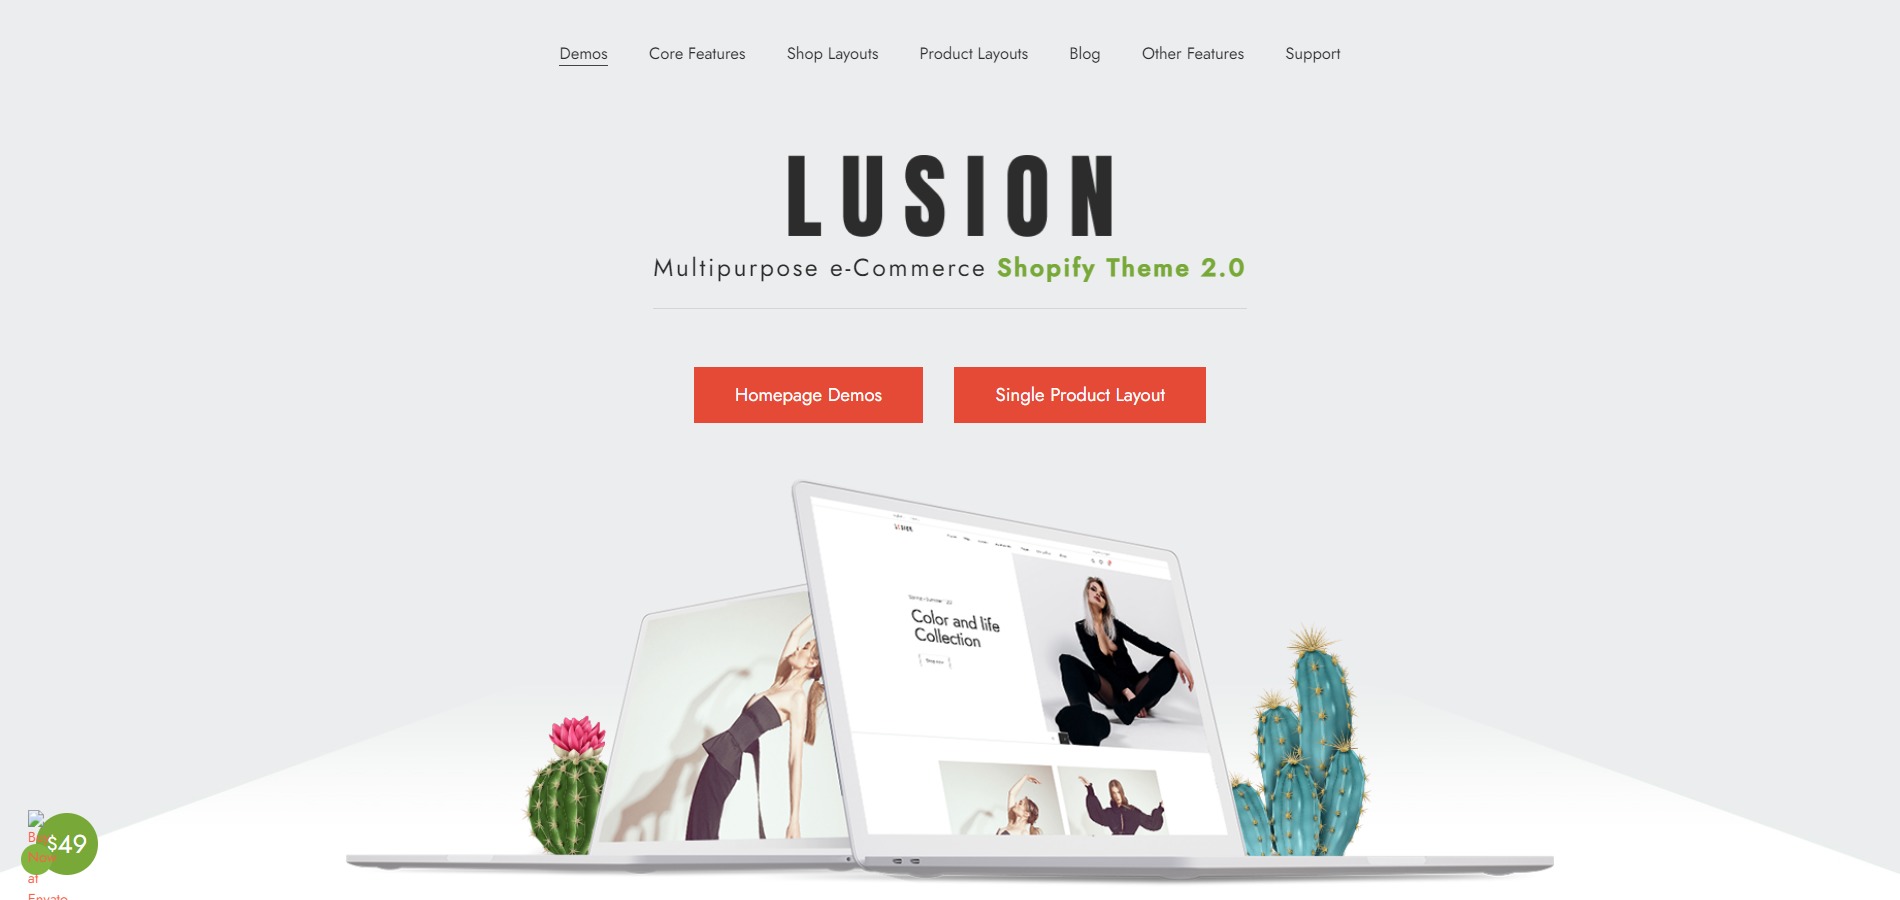 Lusion-Multipurpose-eCommerce-Shopify